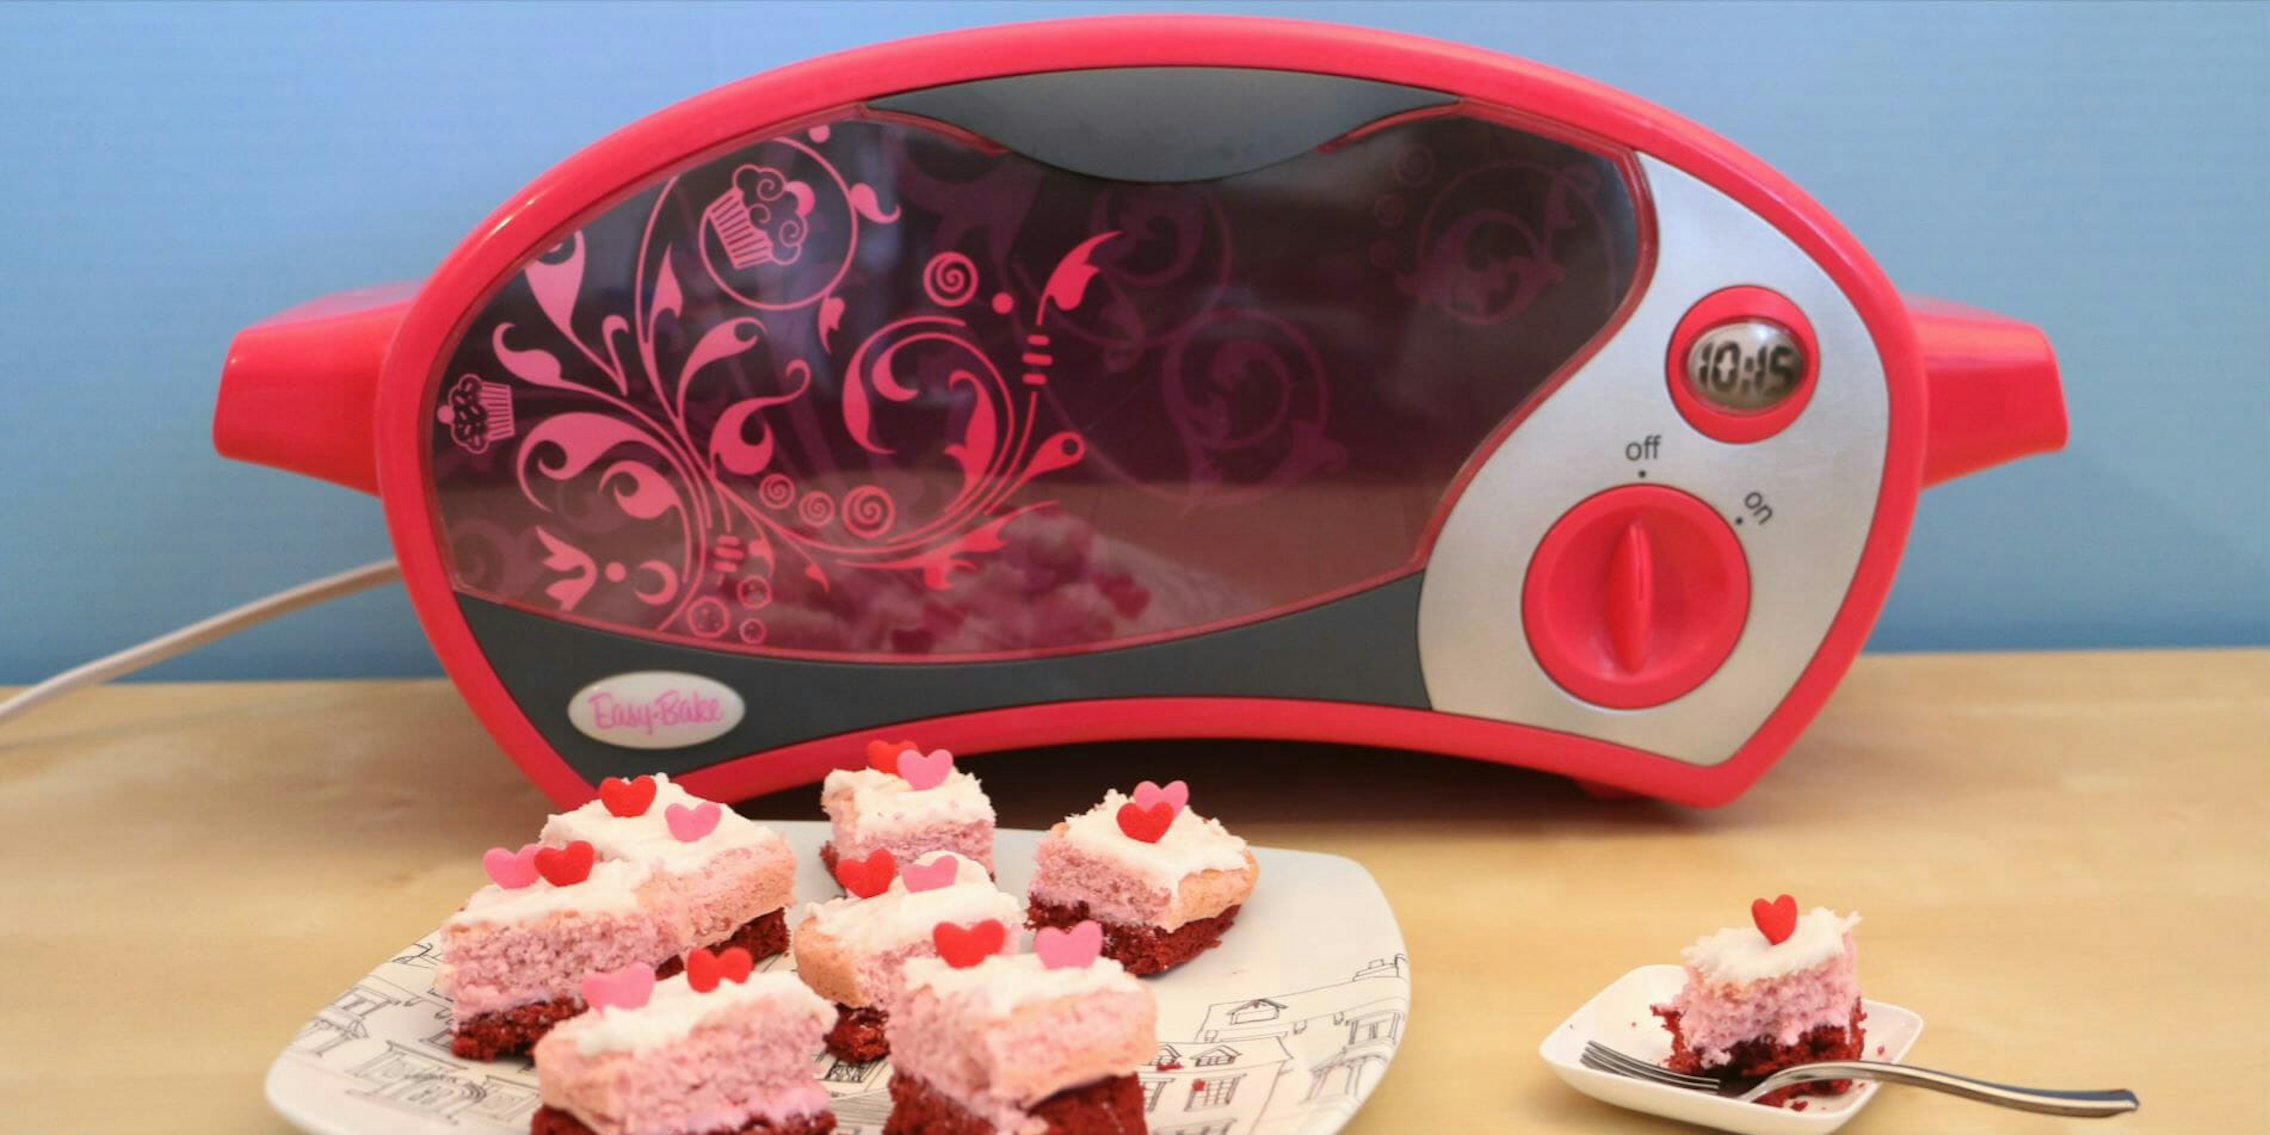 Review] Easy-Bake Oven